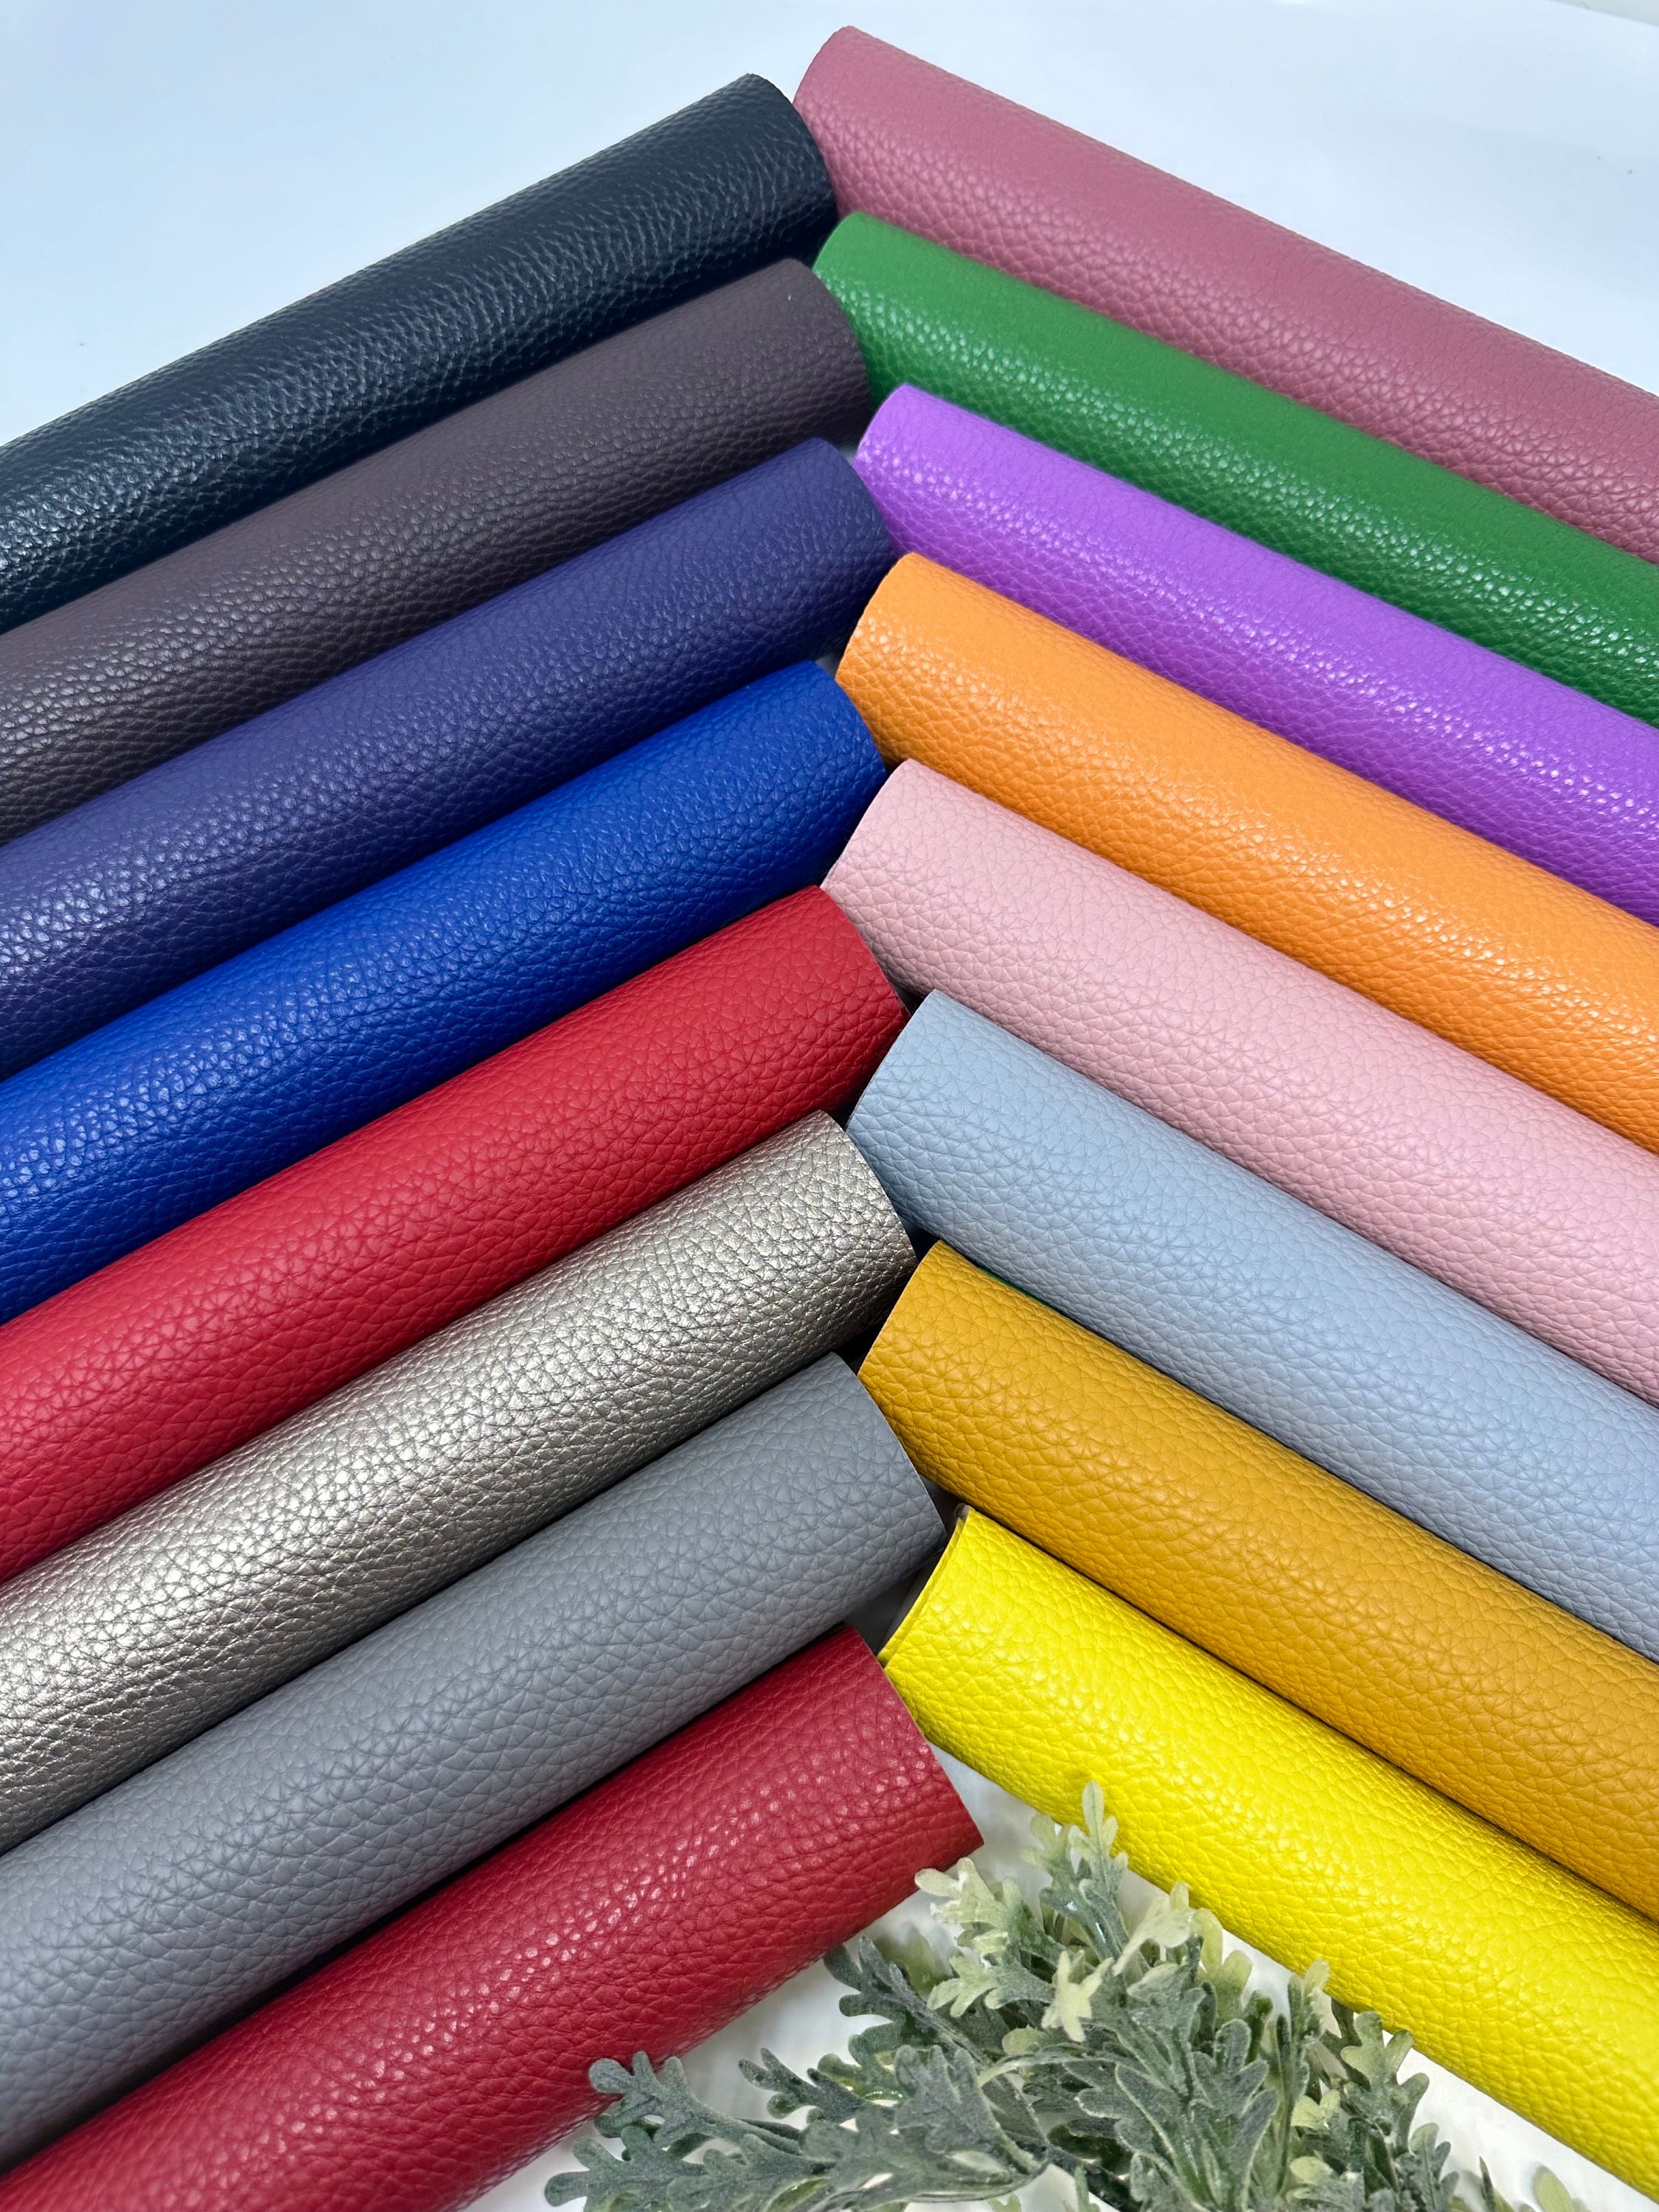 Buy Wholesale China Faux Leather Auto Upholstery Fabric & Faux Leather  Upholstery Fabric at USD 1.7